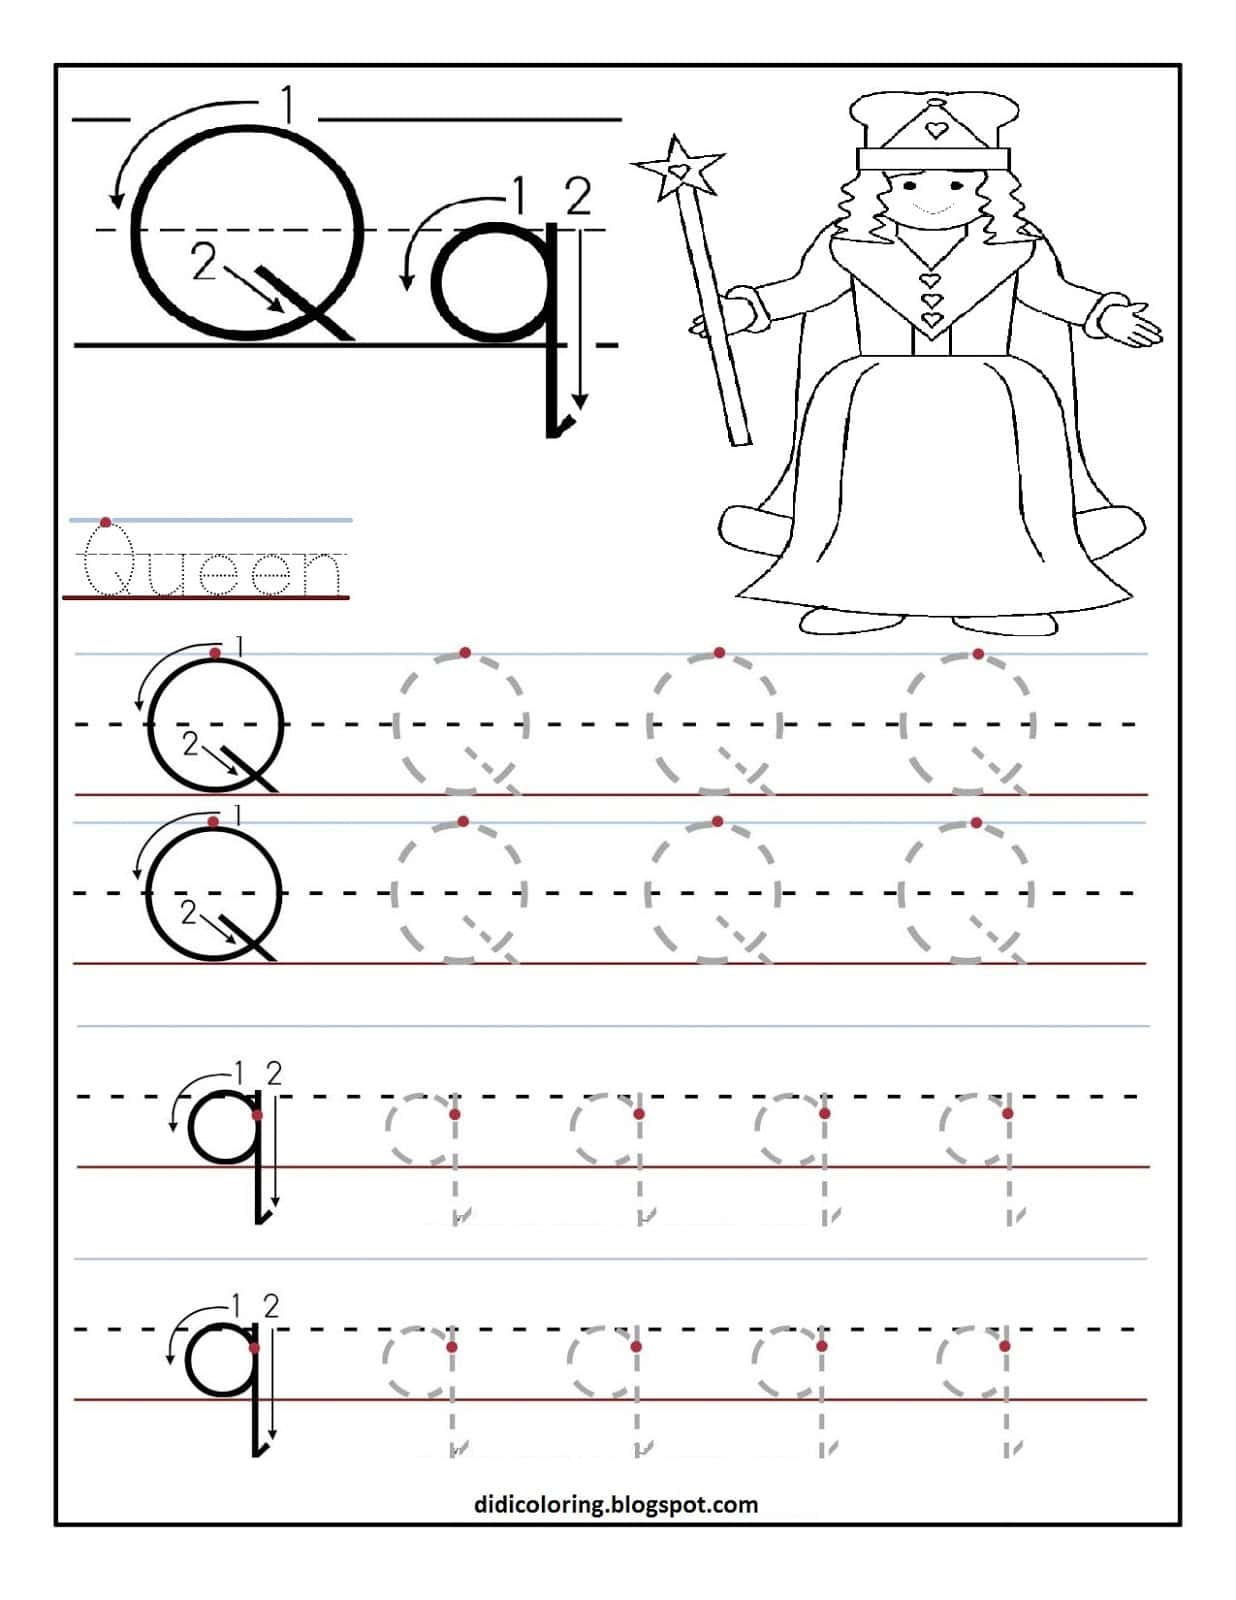 Preschool Worksheets Age 3 And Free Alphabet Writing Worksheets